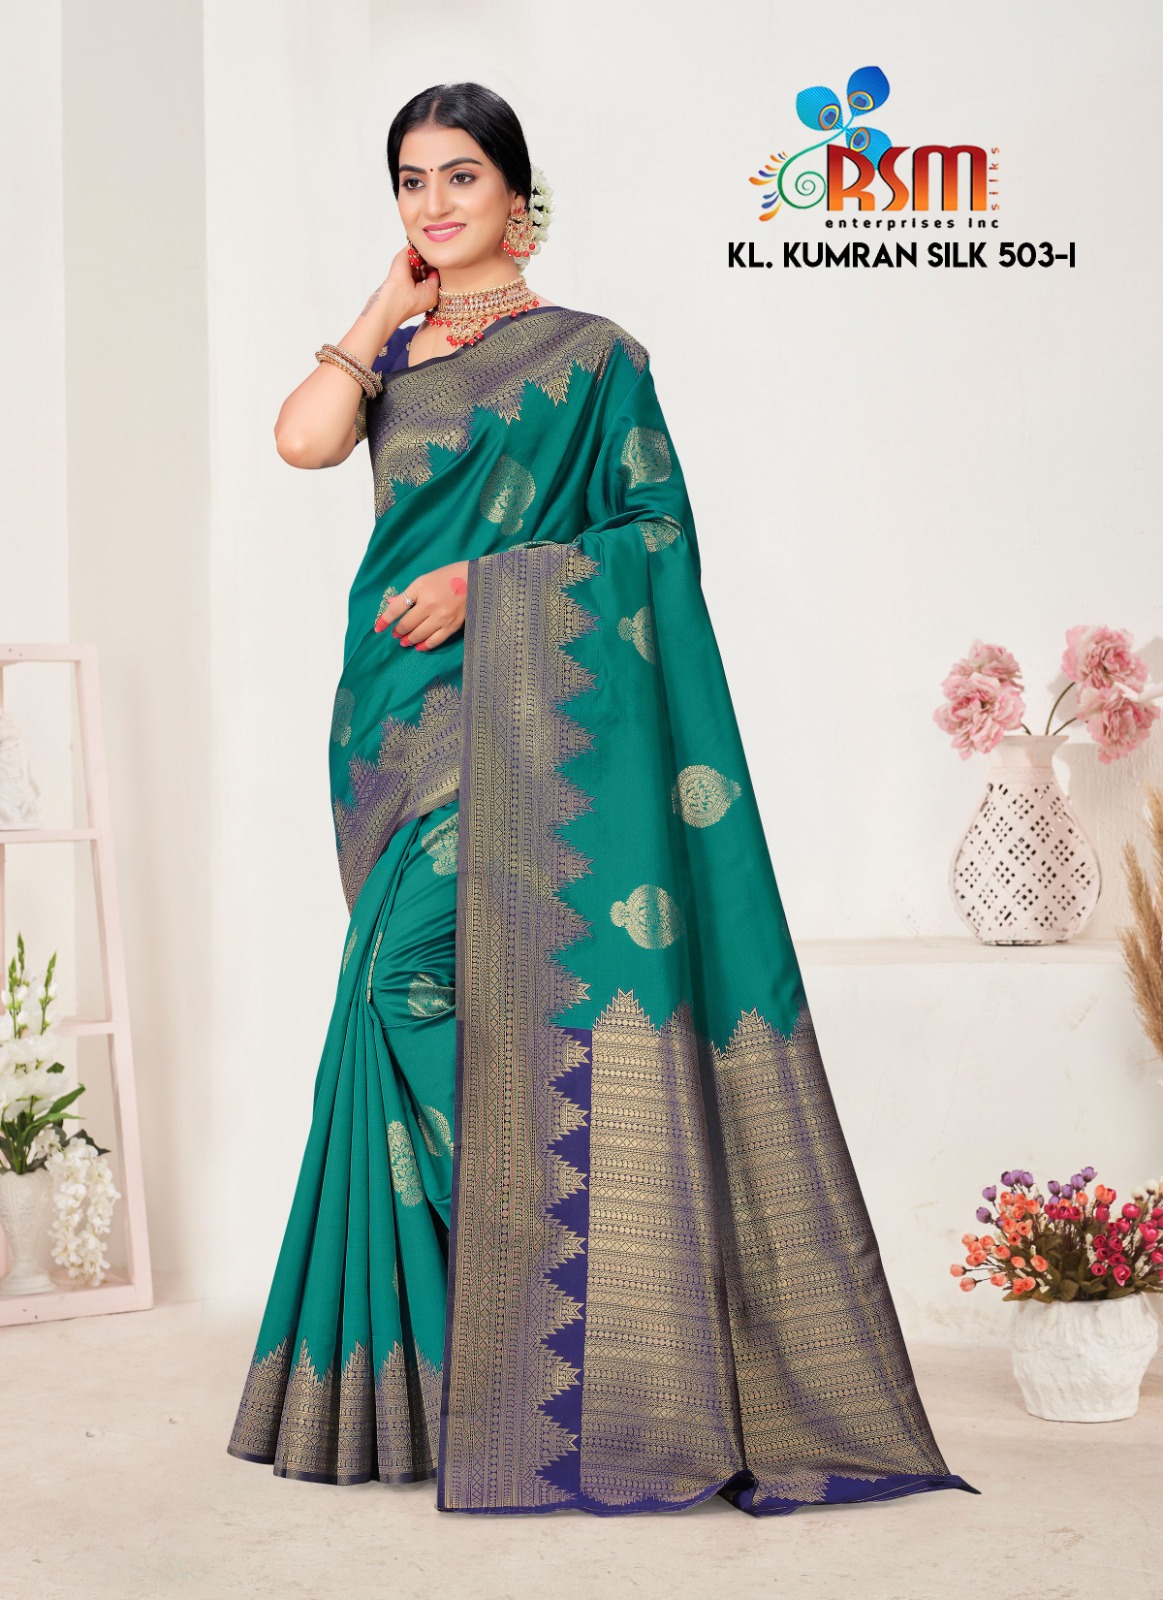 Party Wear Saree in Green with Blue Border - Rsm Silks Online